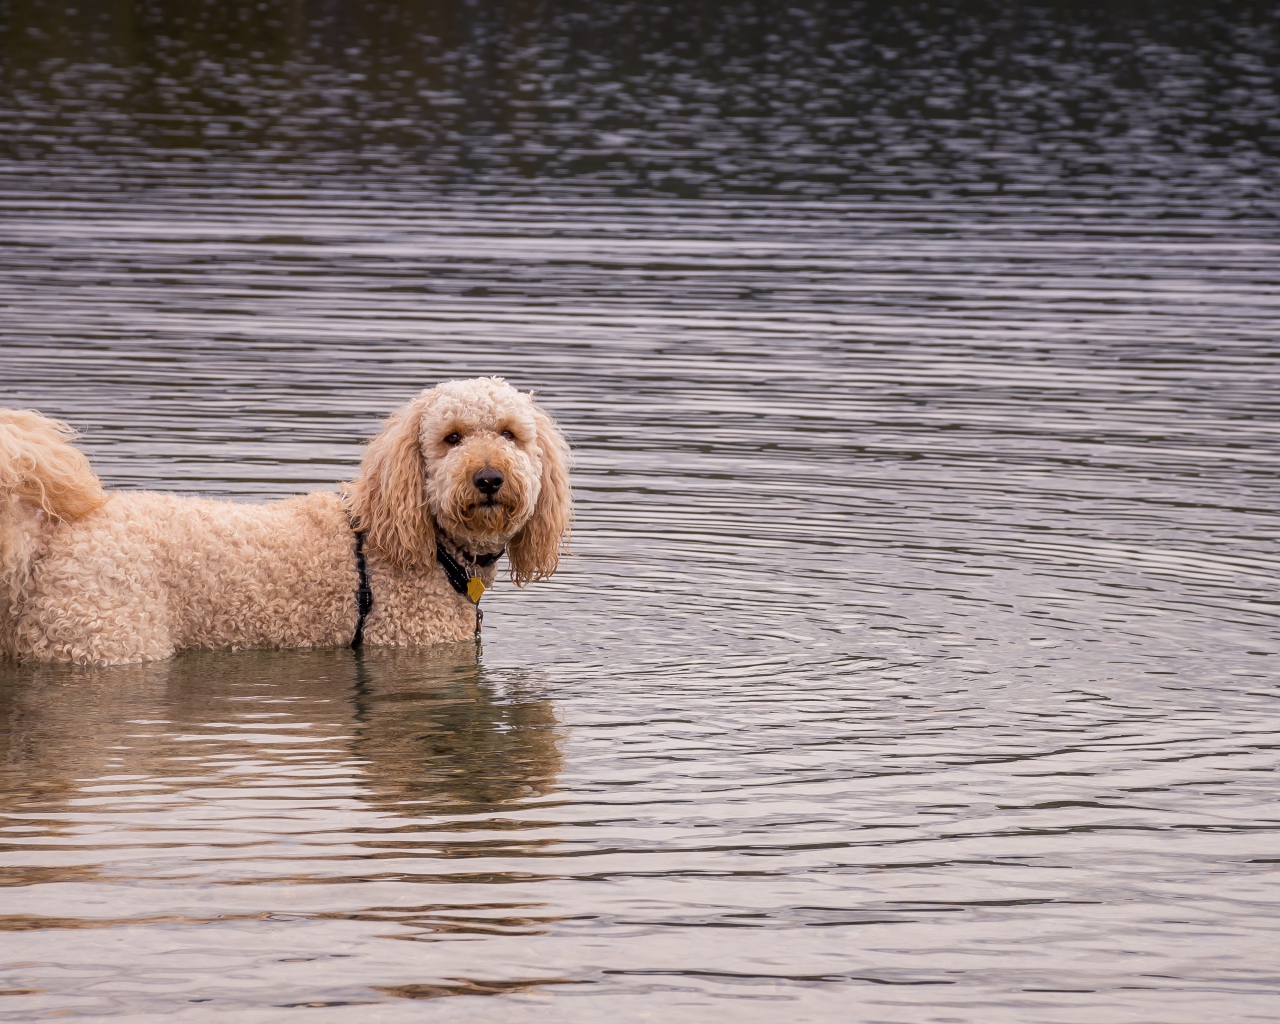 Shaggy dog standing in water